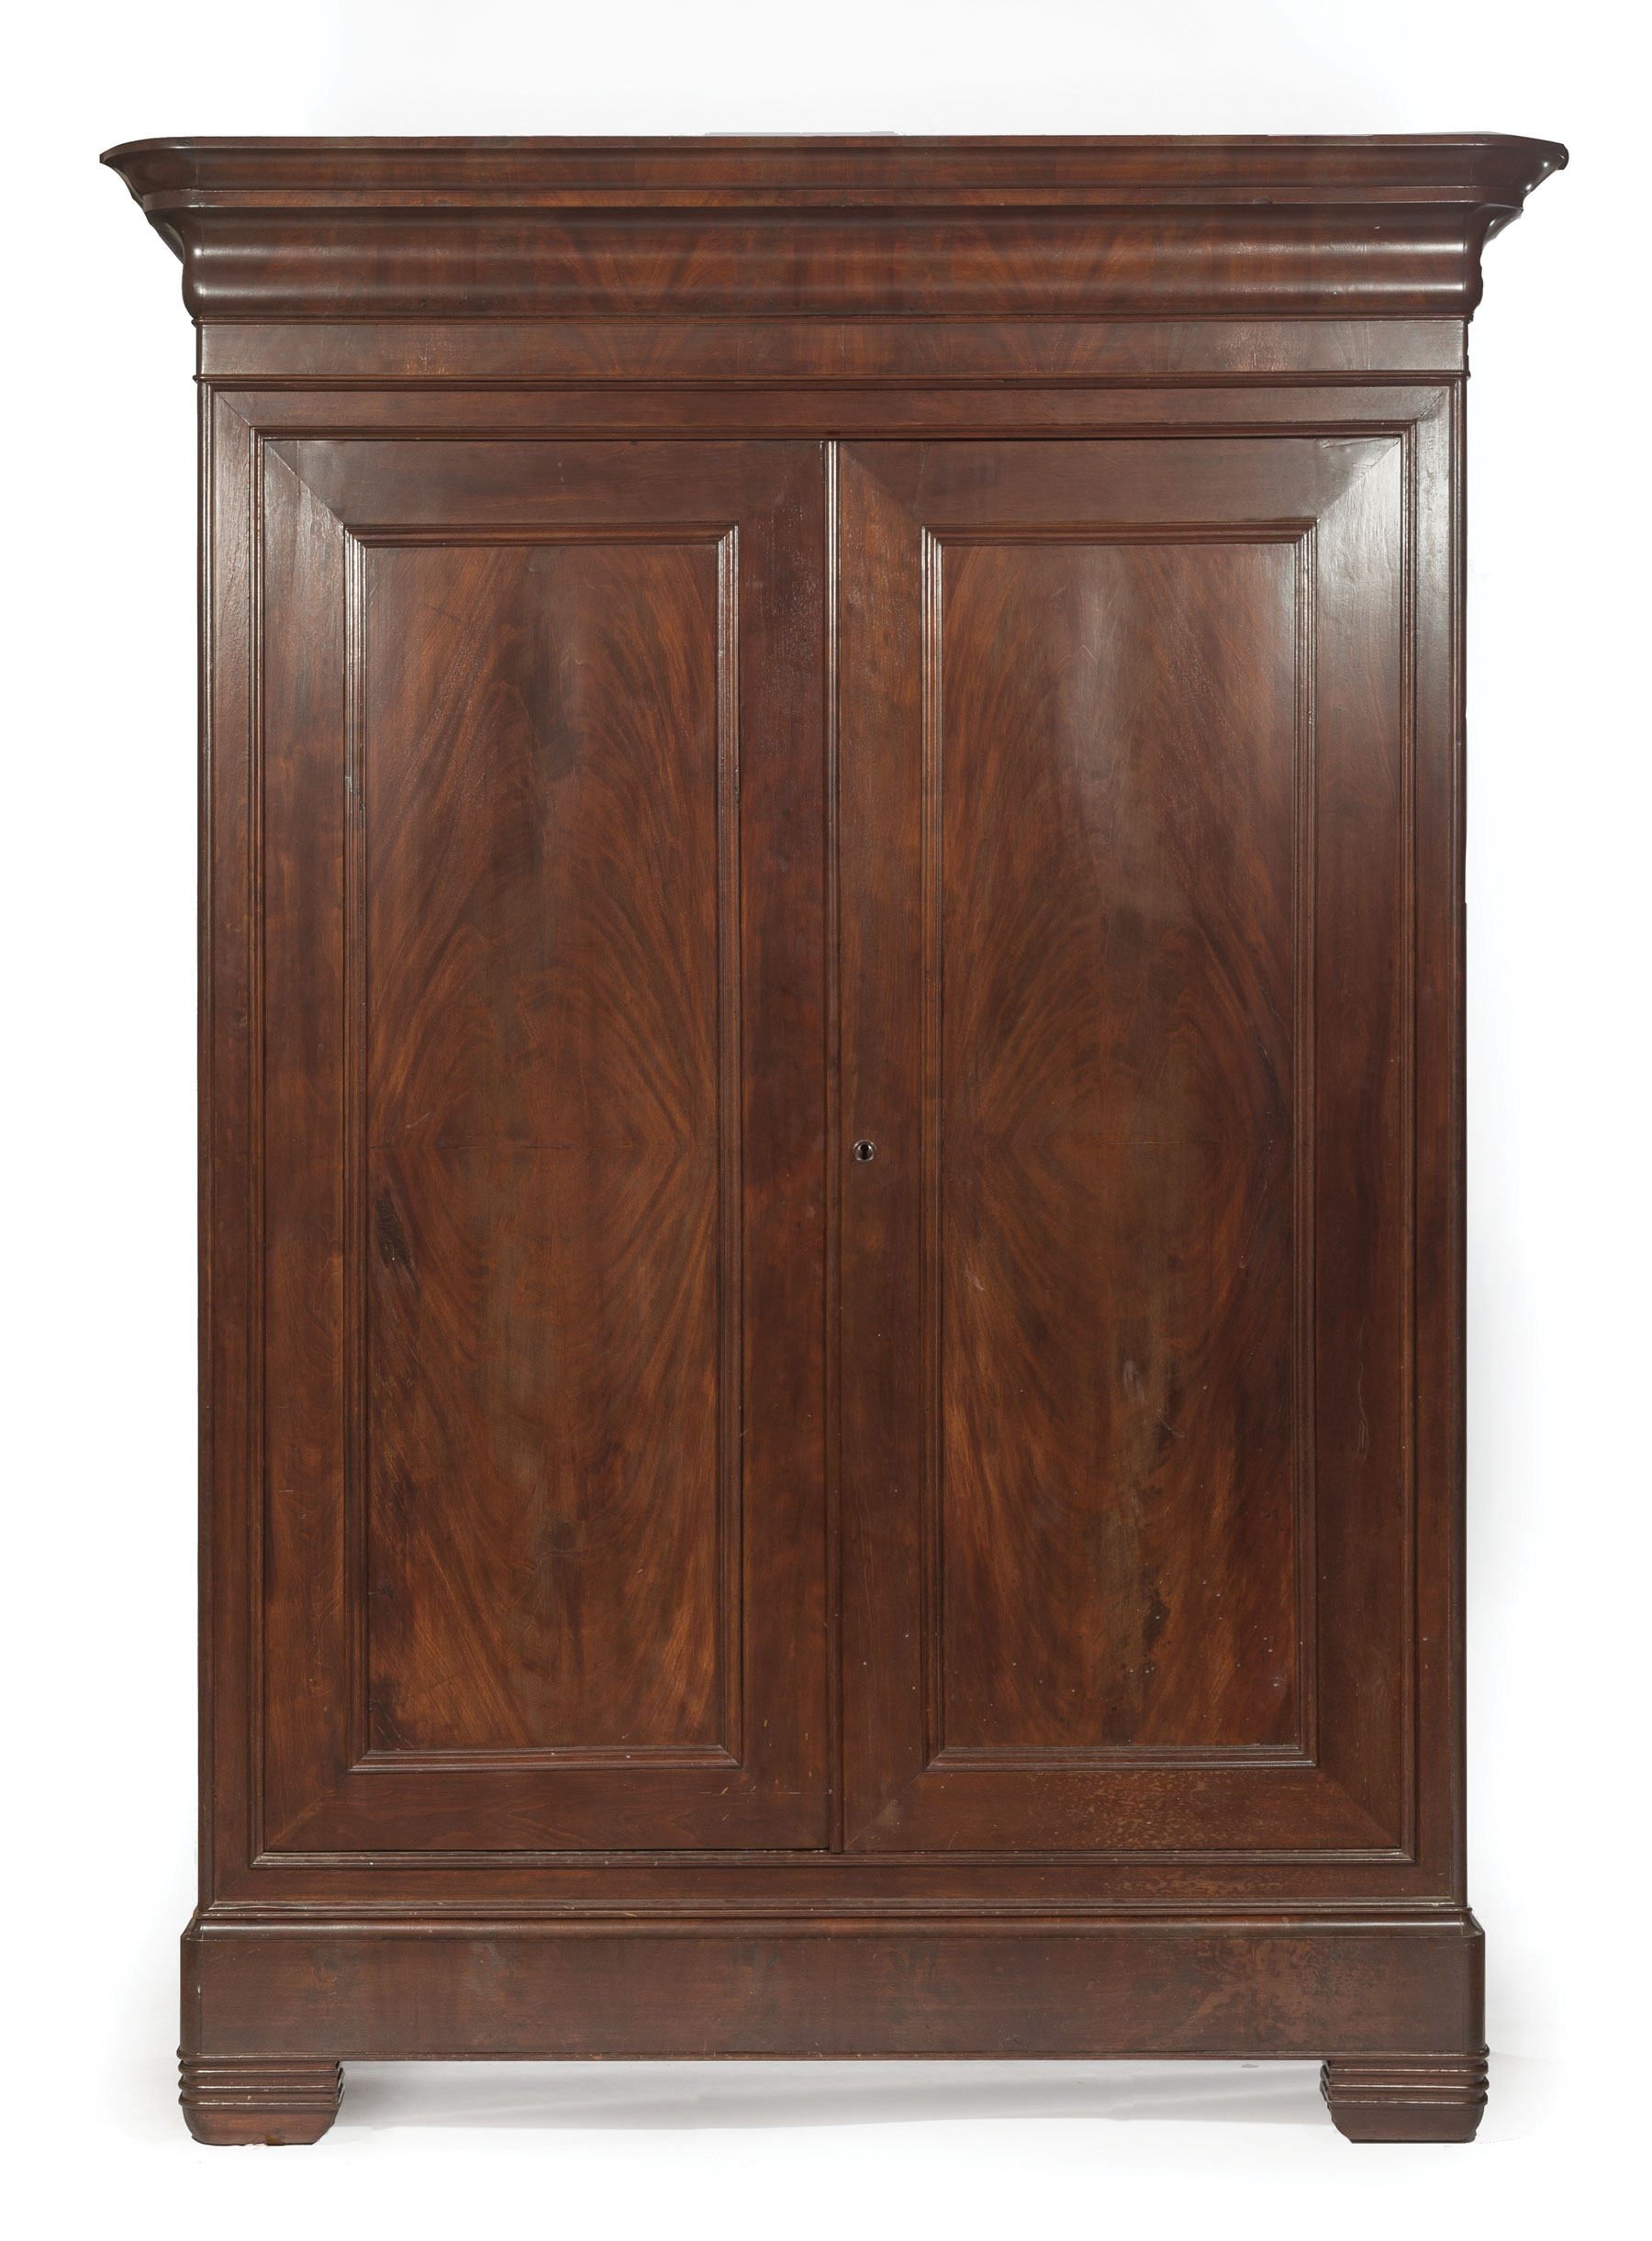 Louisiana Figured Mahogany Armoire , mid-19th c., stepped ogee cornice, molded bookmatched door - Image 2 of 3